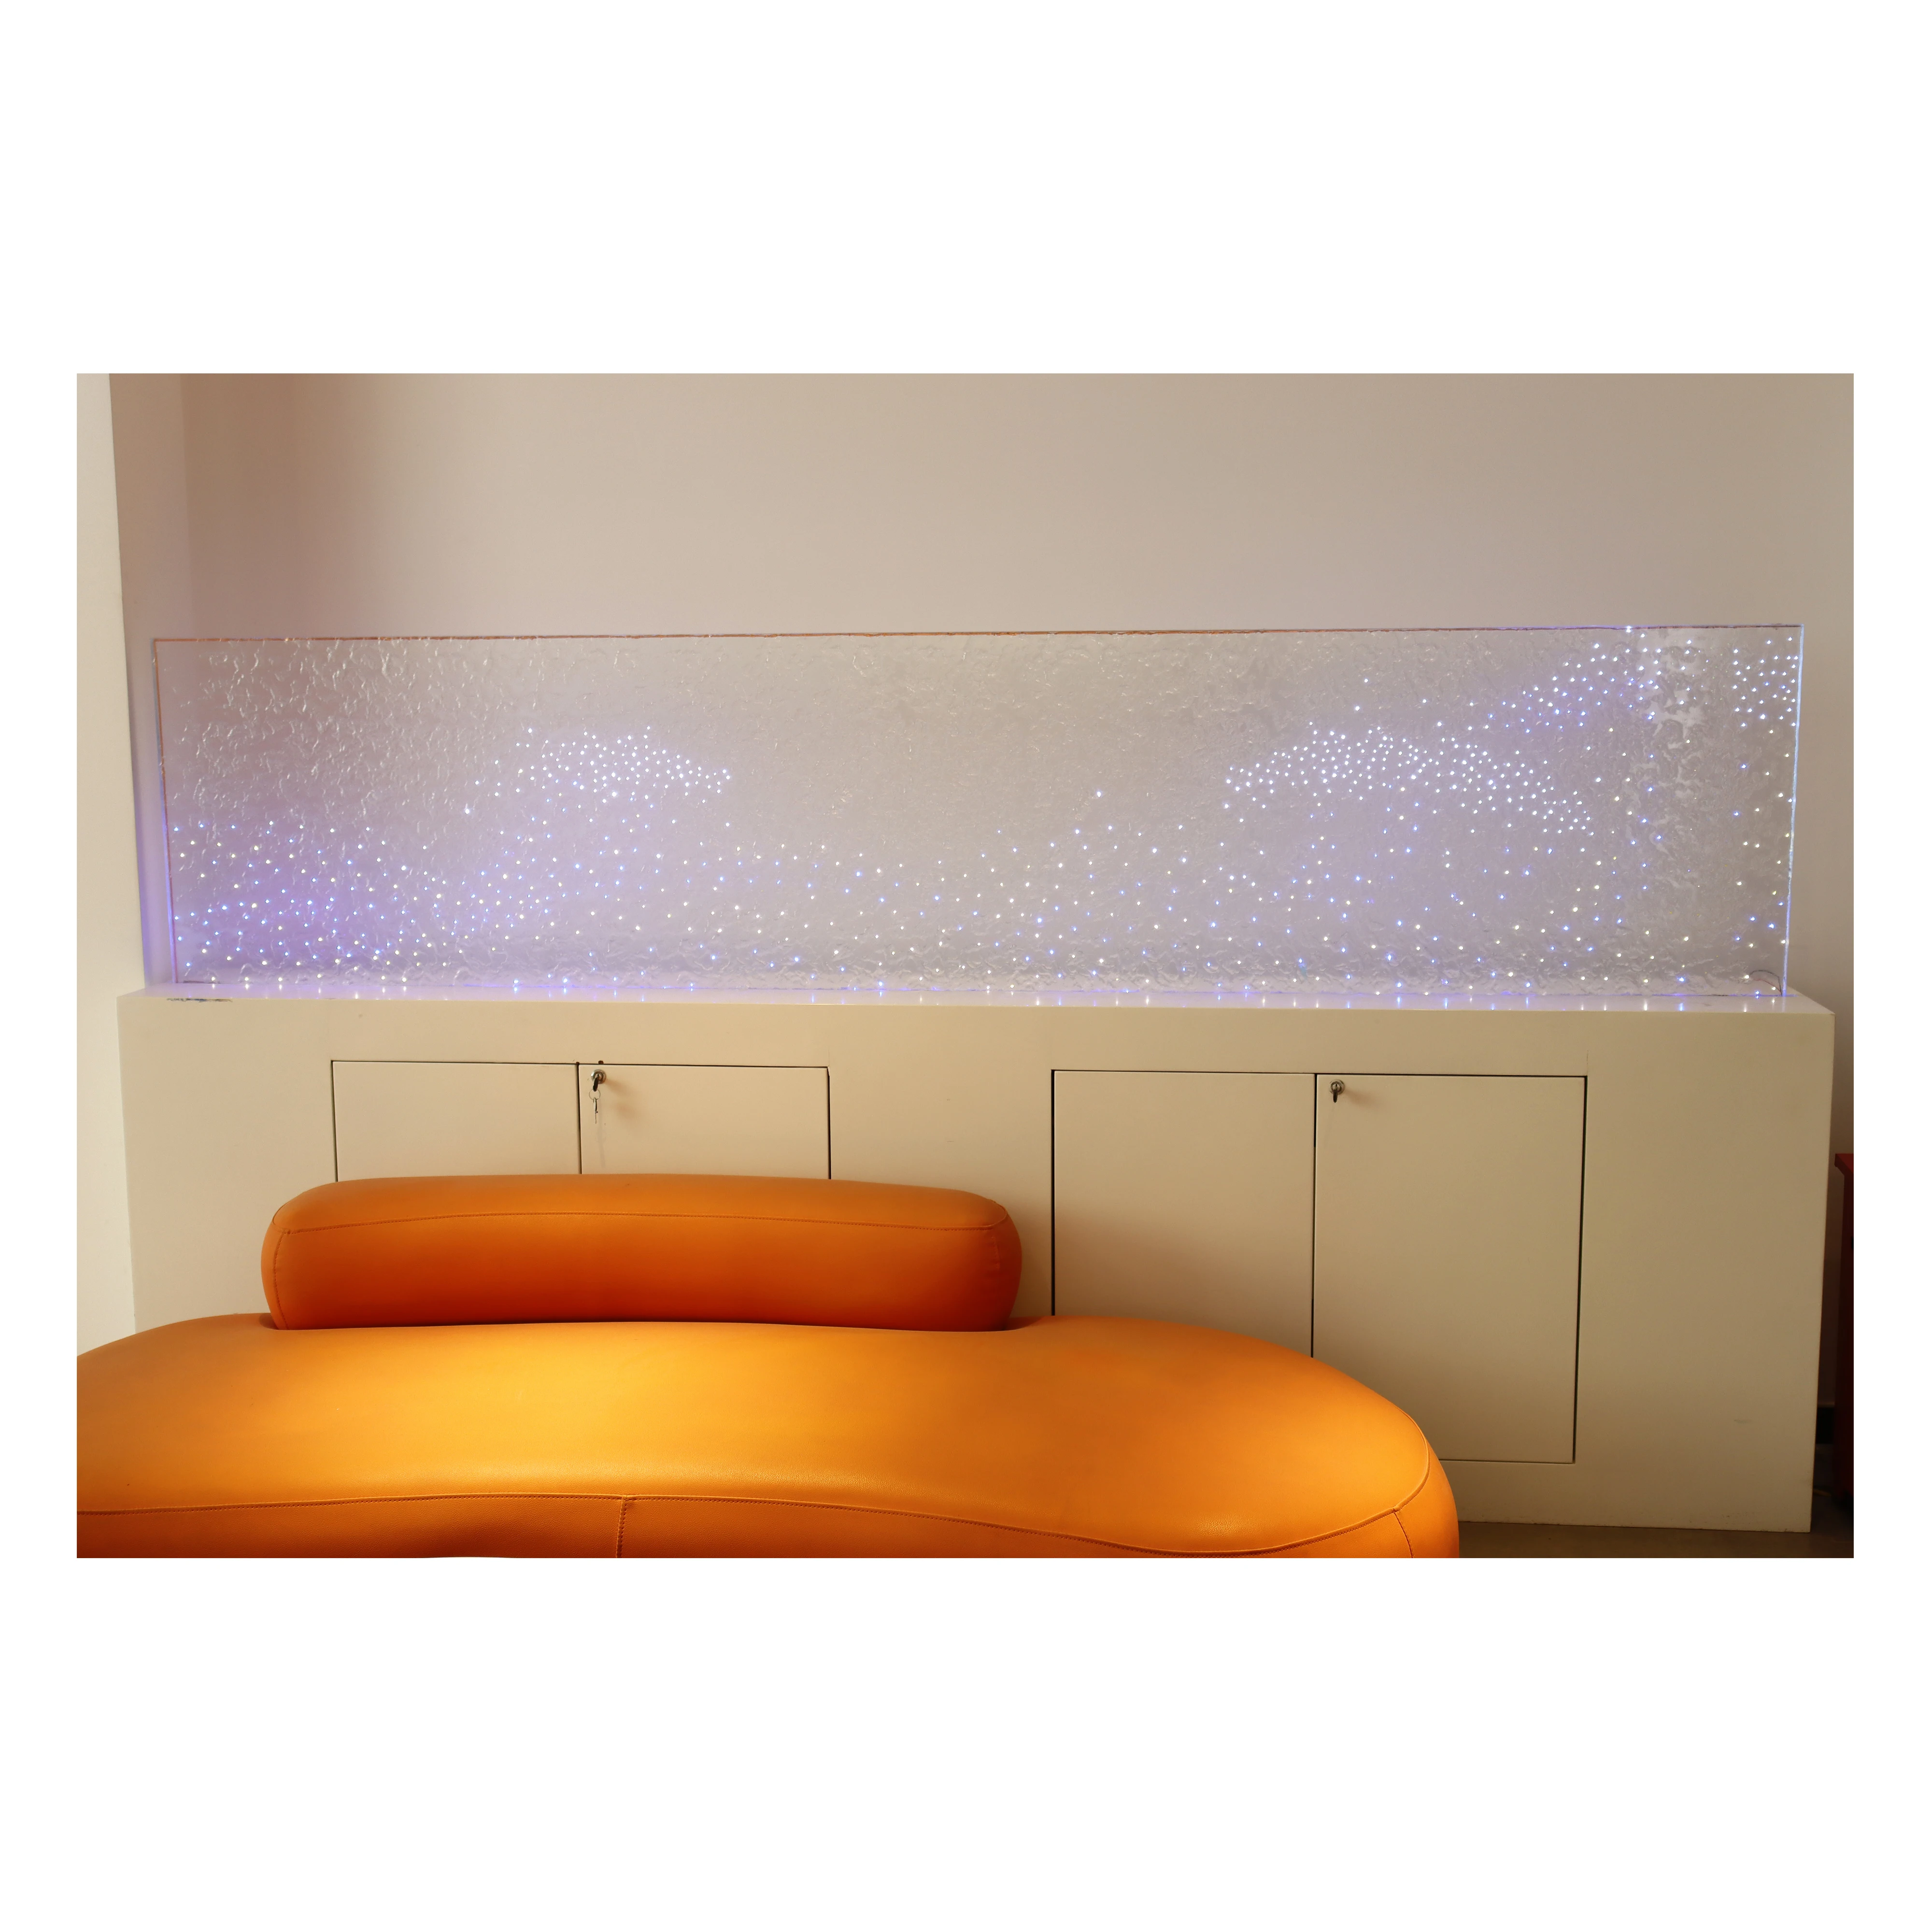 460-470nm wave length blue LED glass office/home decoration dynamic LED panel for fish tank in aquarium